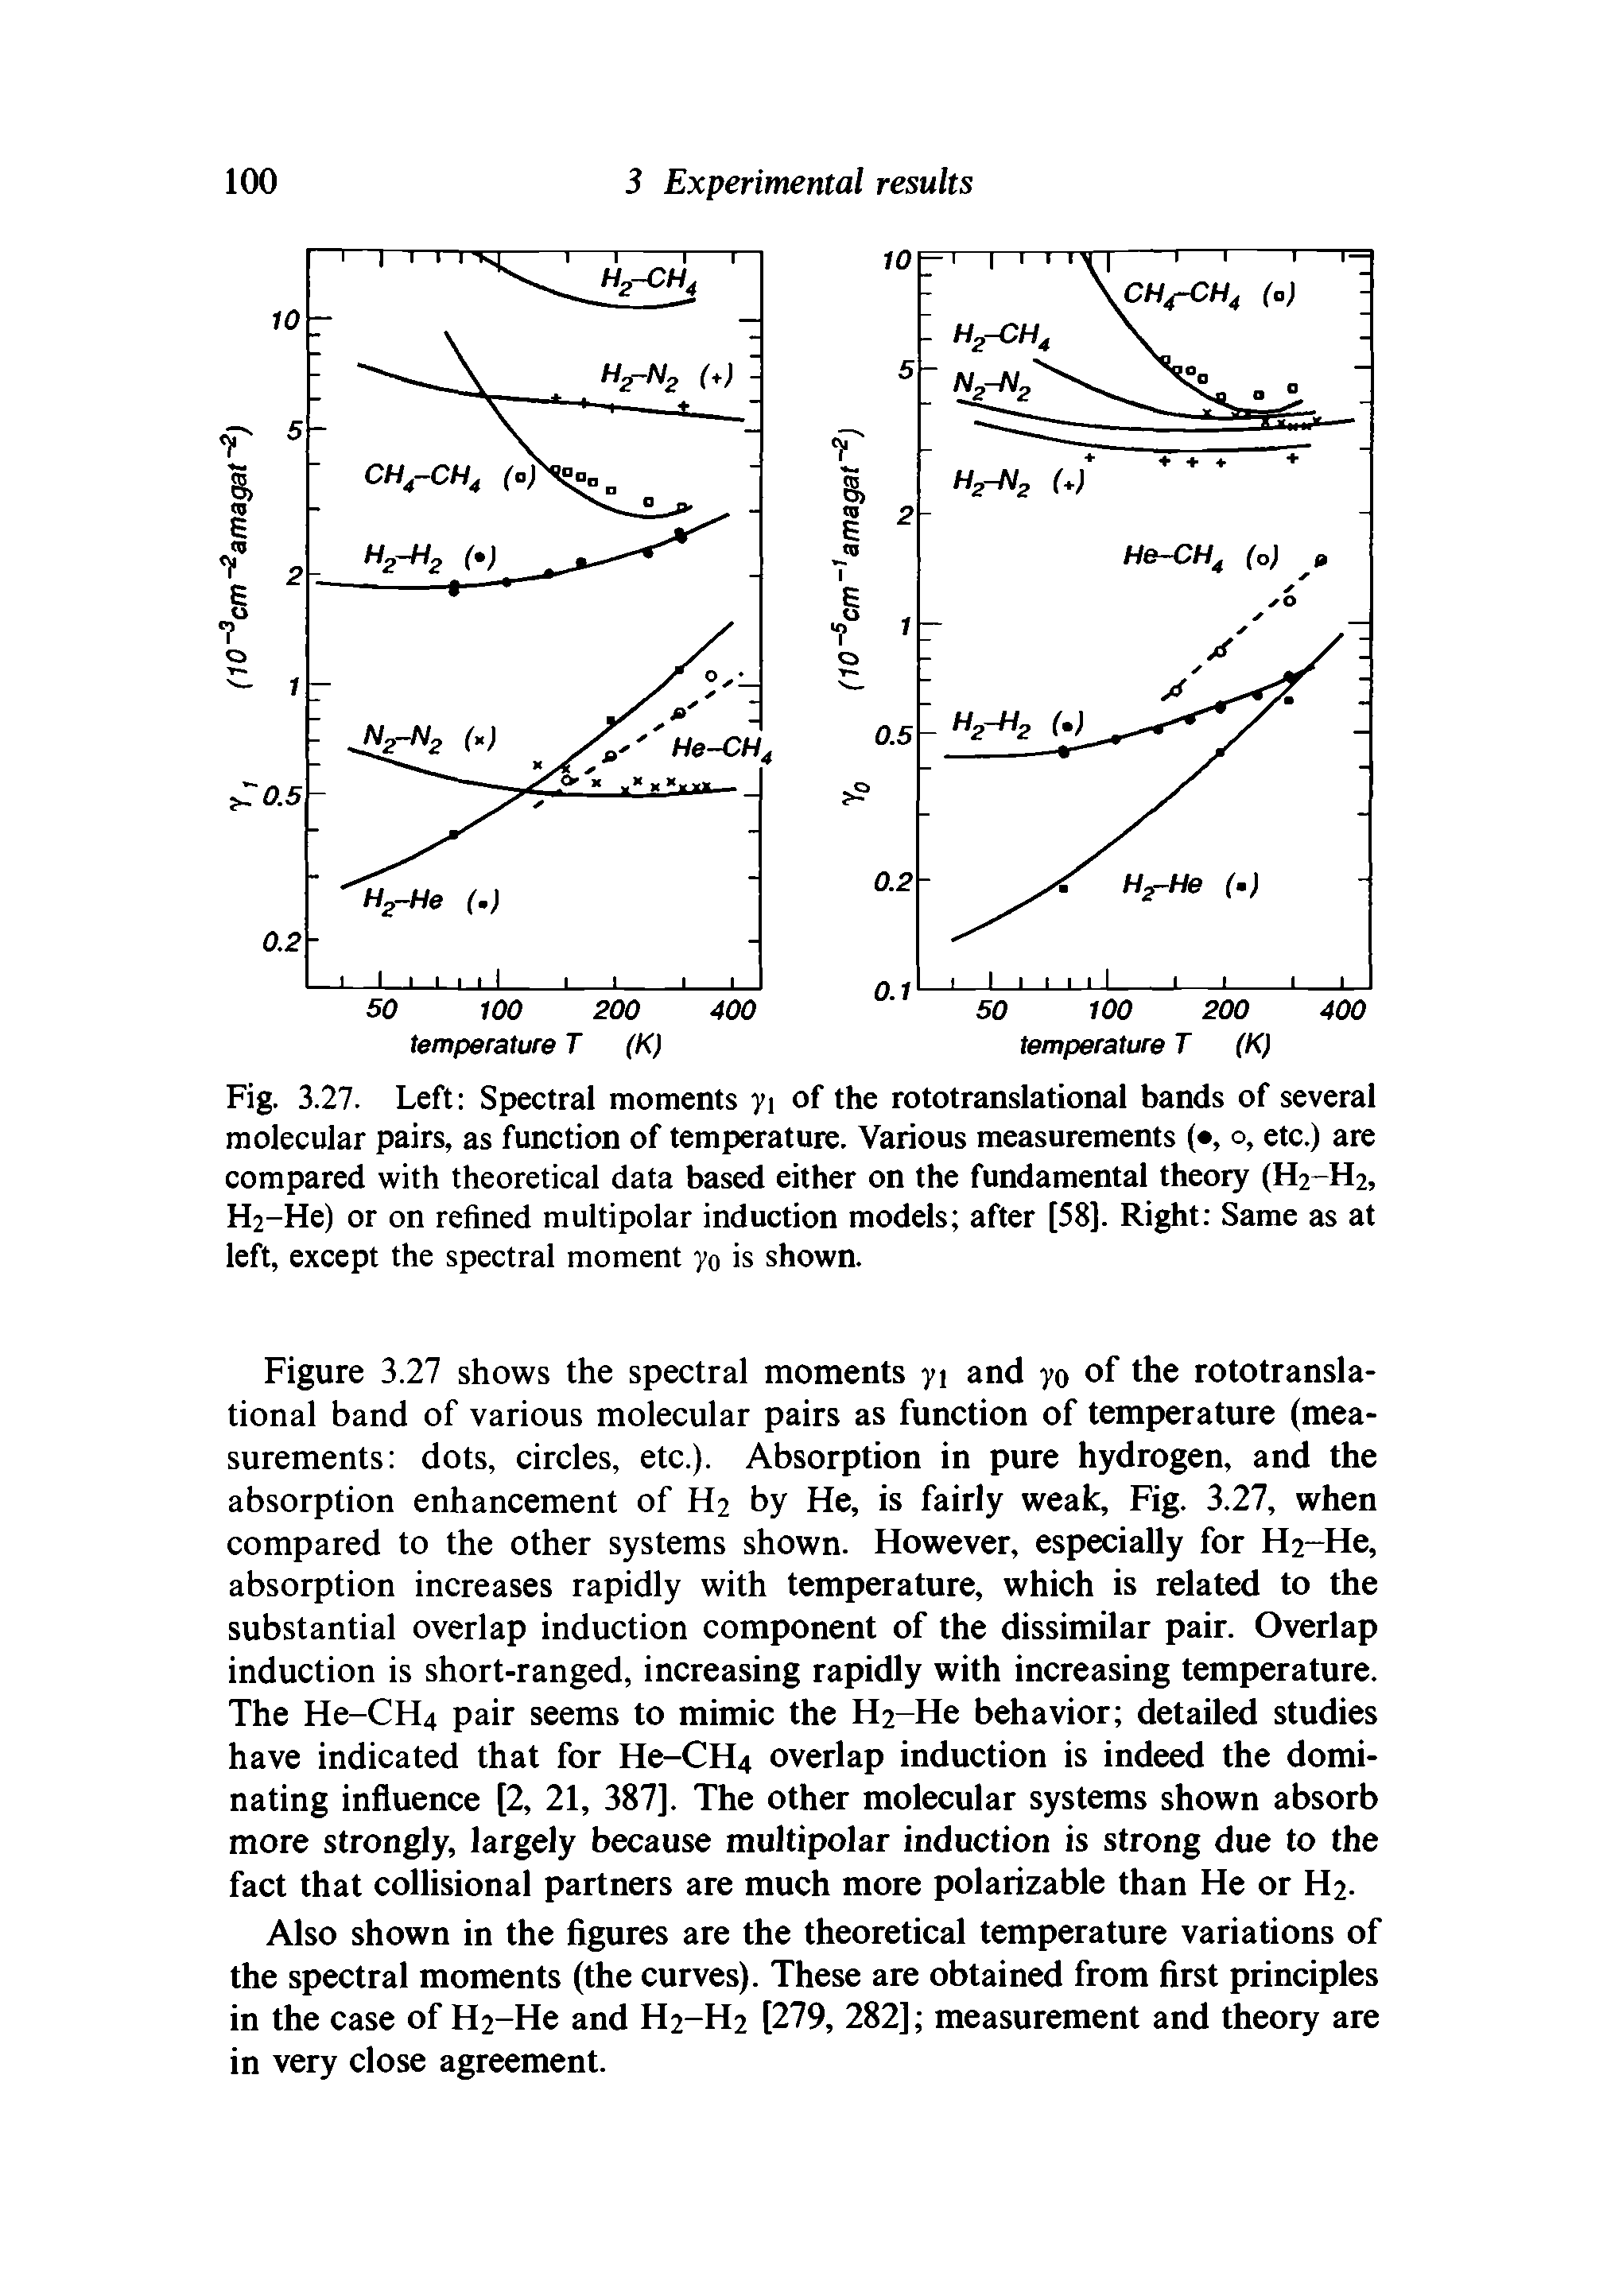 Fig. 3.27. Left Spectral moments 71 of the rototranslational bands of several molecular pairs, as function of temperature. Various measurements ( , o, etc.) are compared with theoretical data based either on the fundamental theory (H2-H2, H2-He) or on refined multipolar induction models after [58]. Right Same as at left, except the spectral moment 70 is shown.